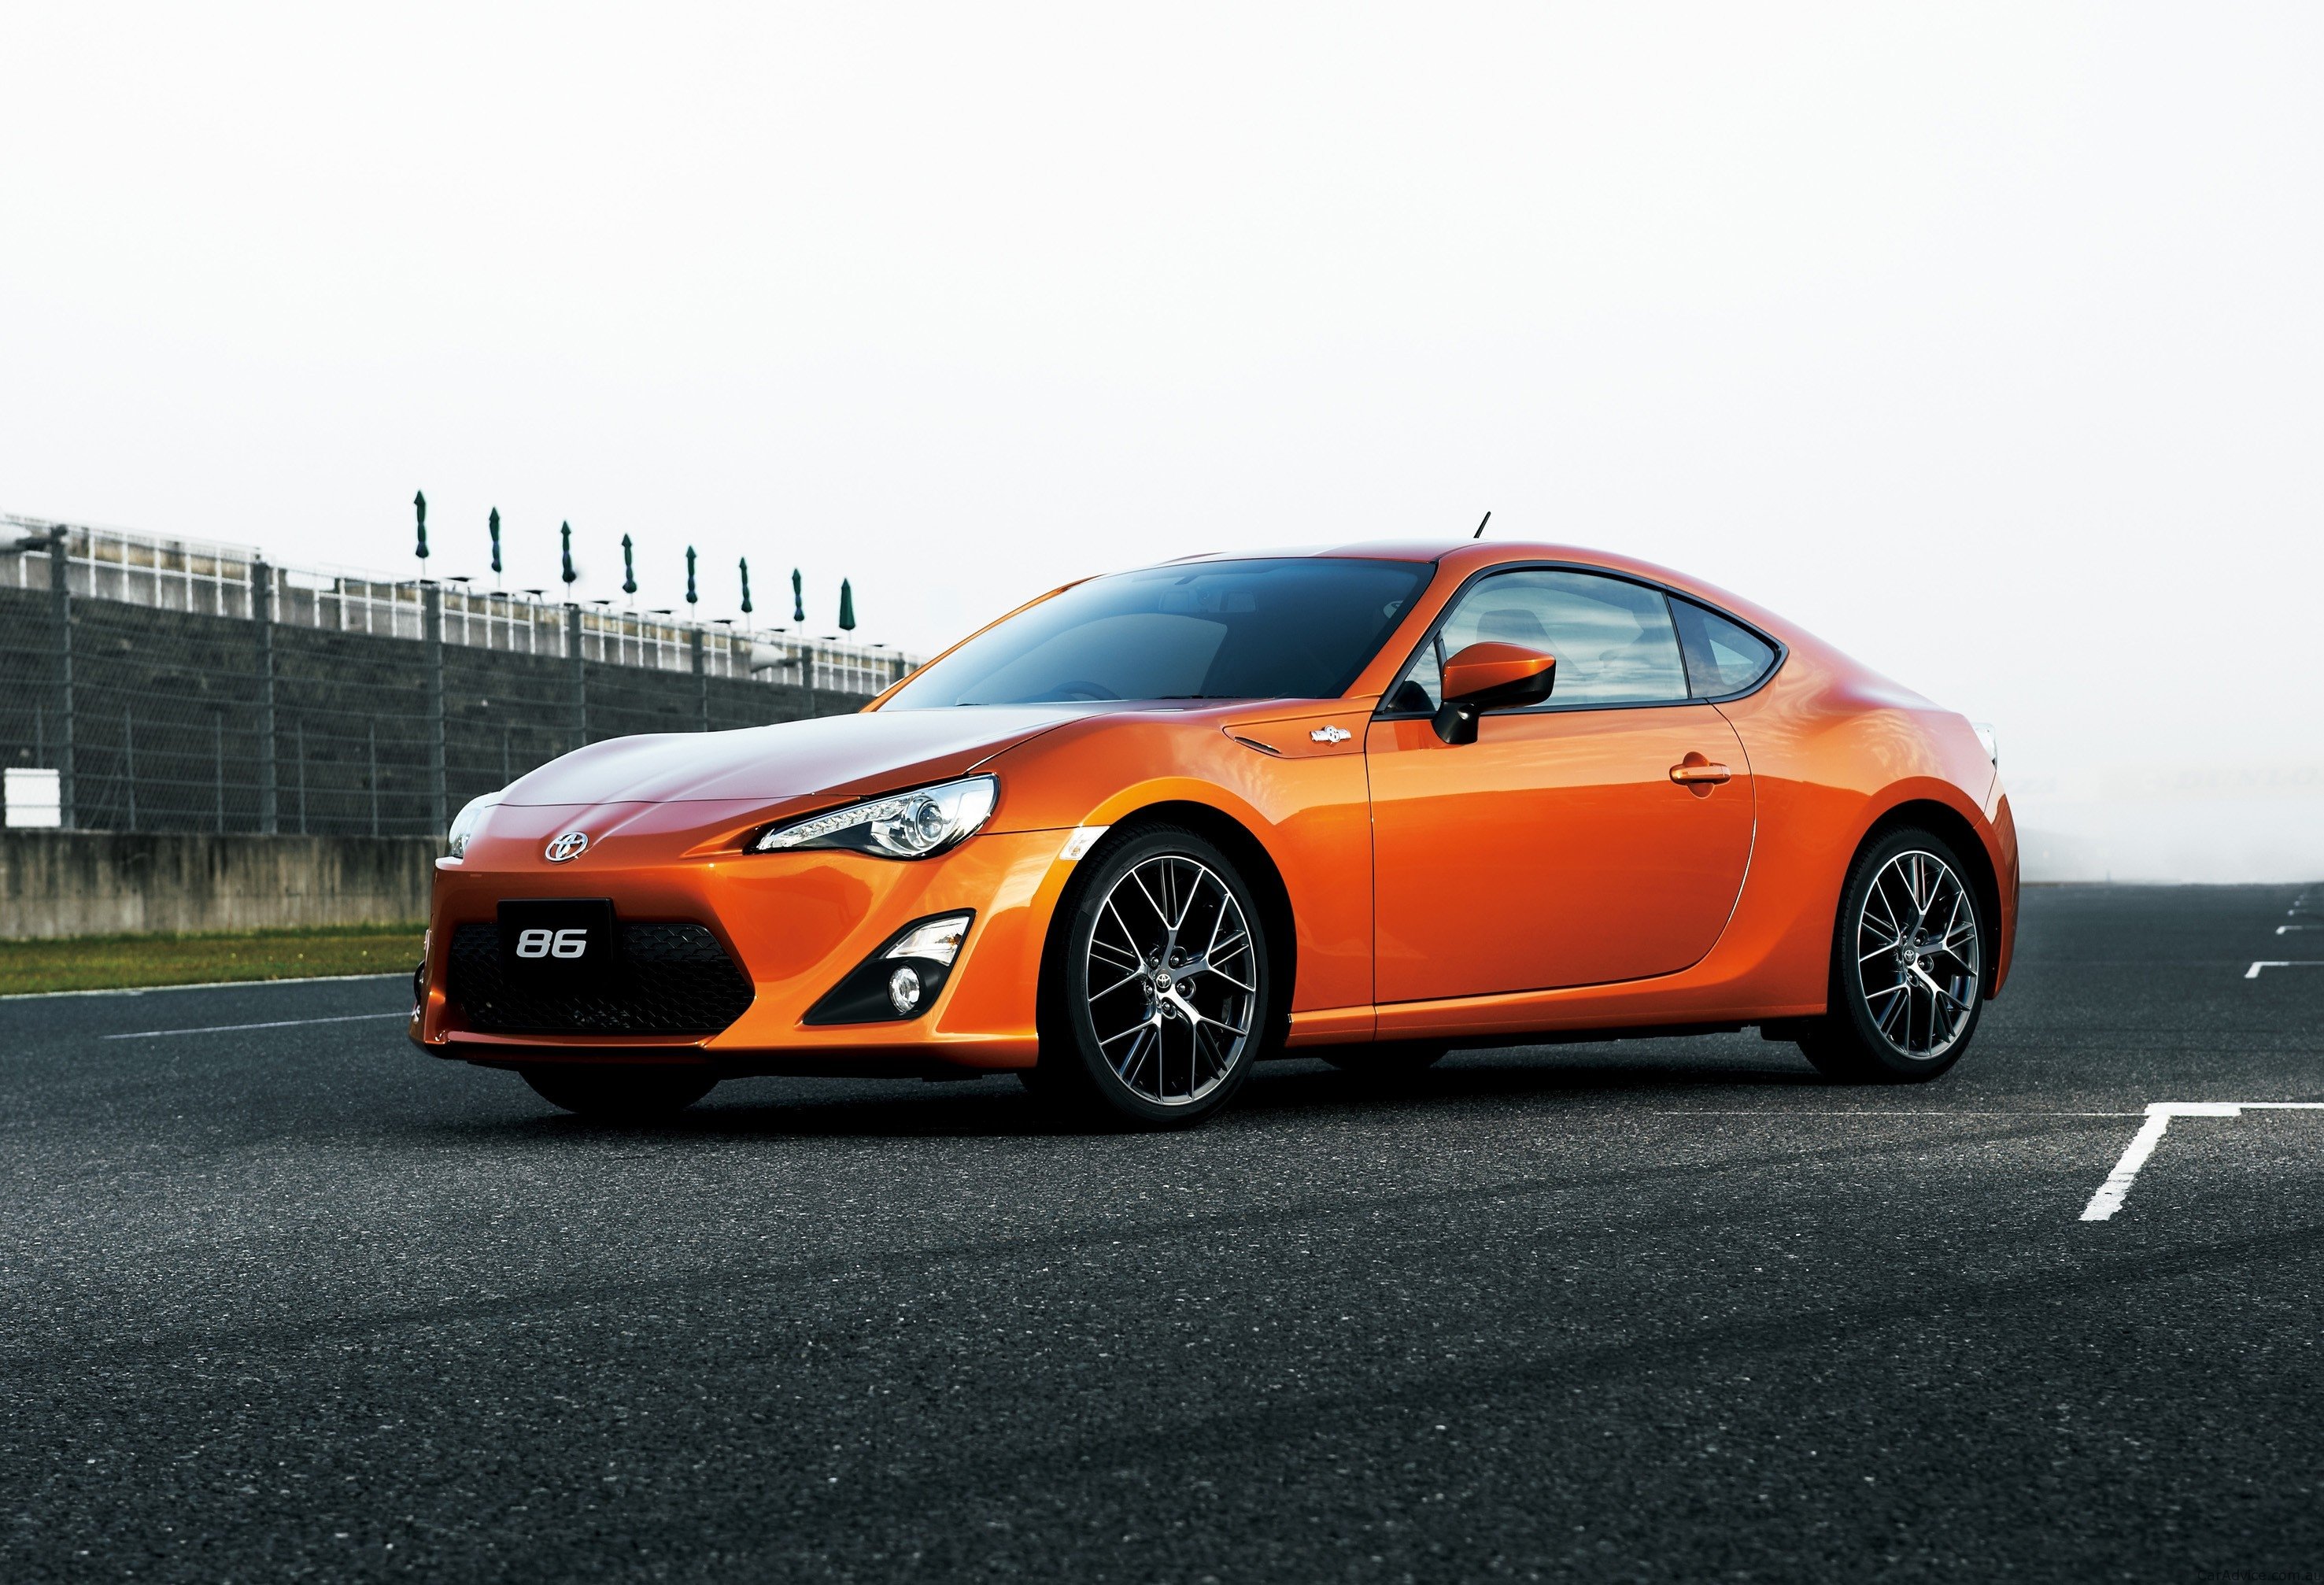 Toyota 86 sports car revealed: official pictures amp; details  Photos 1 